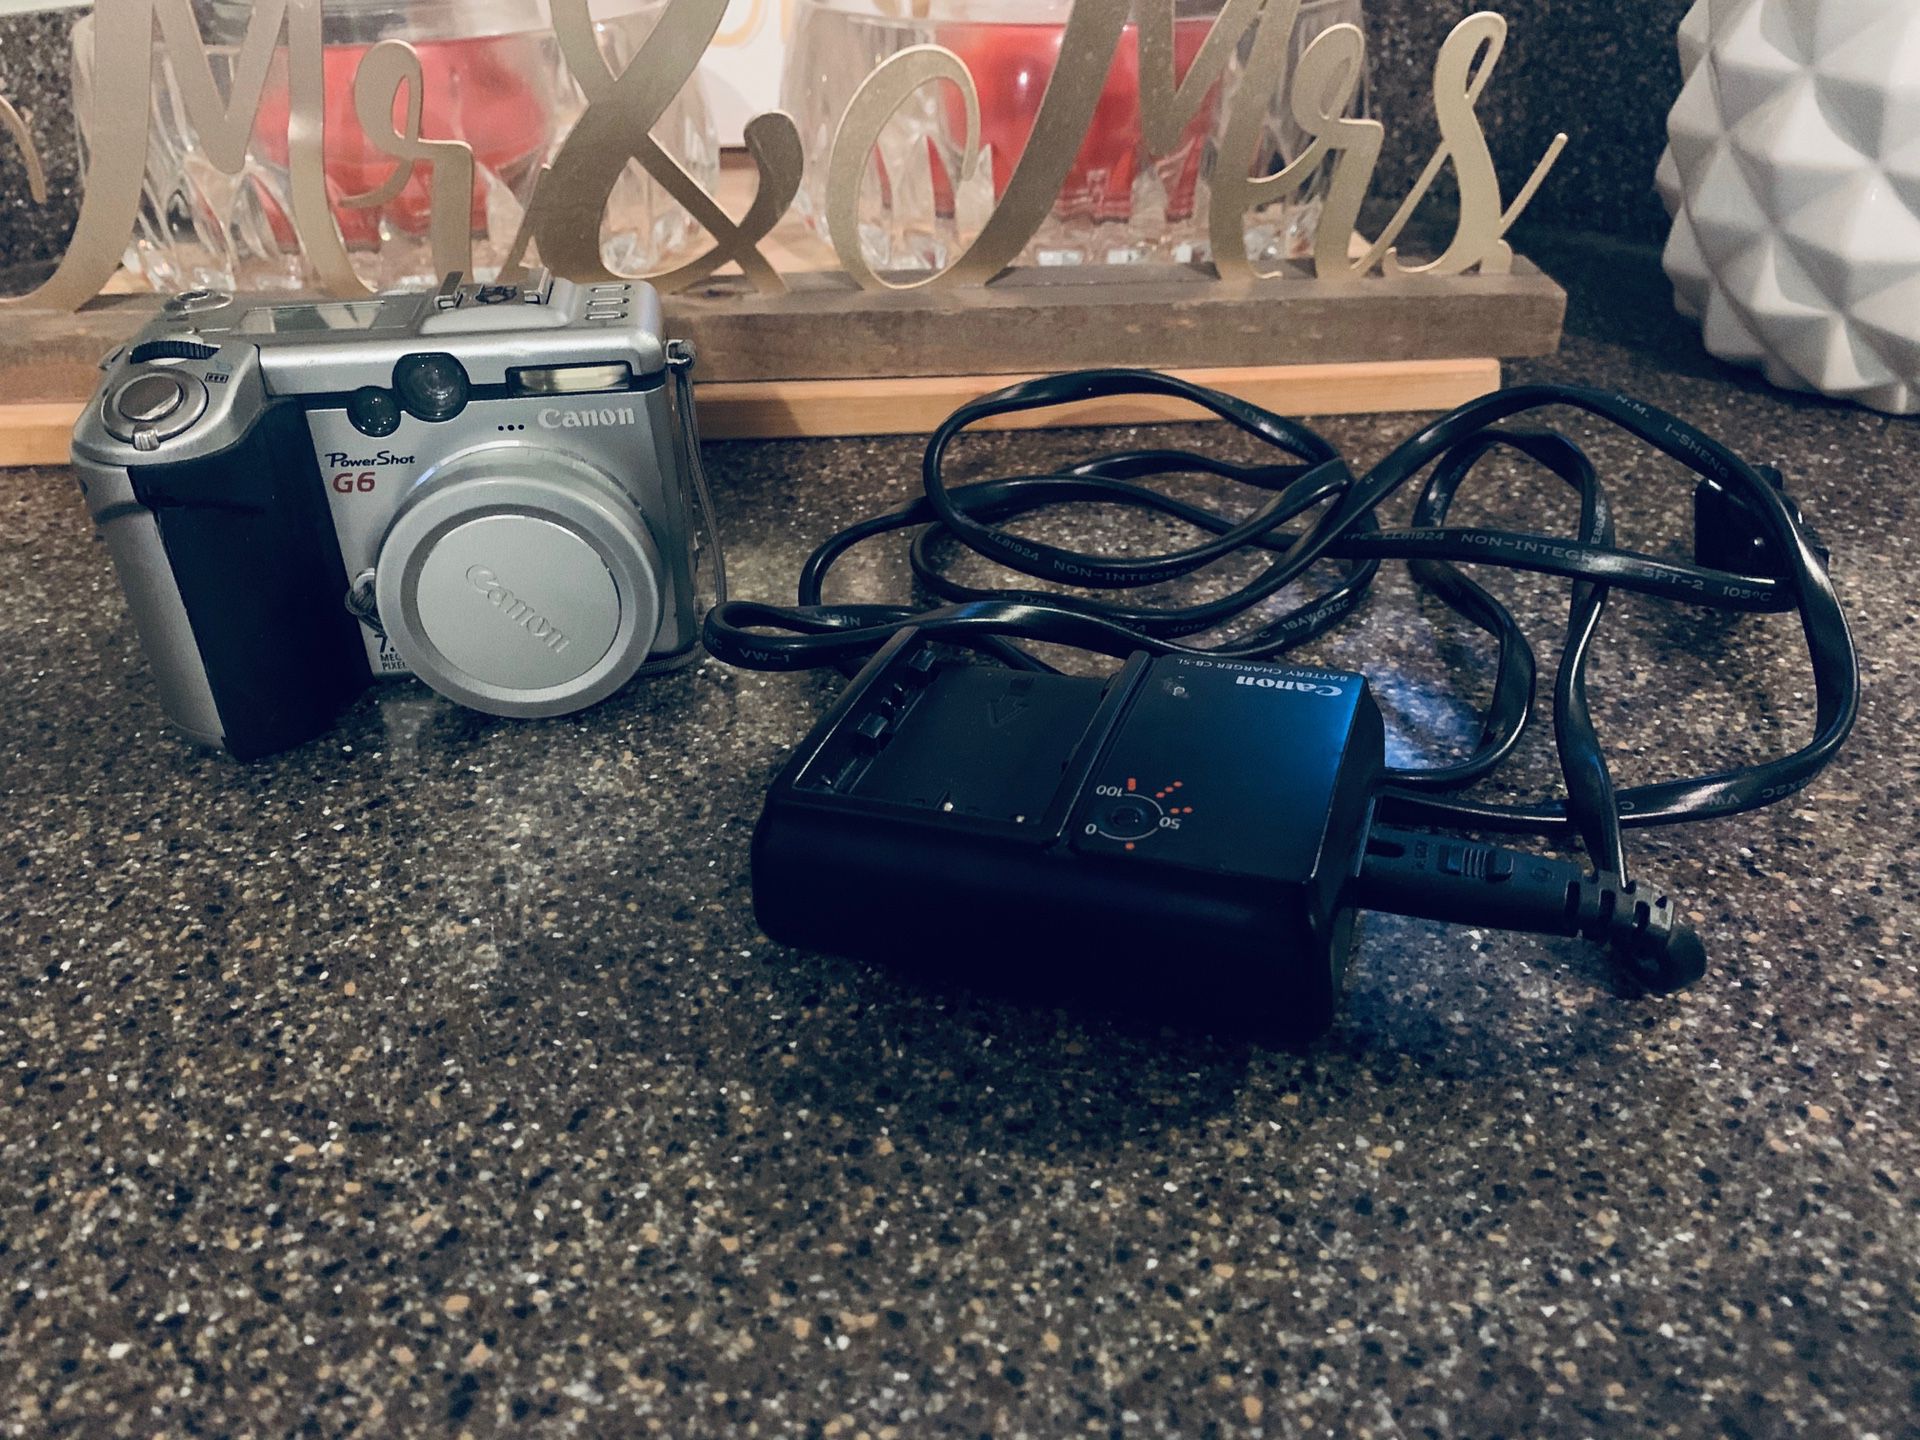 Canon camera with battery charger